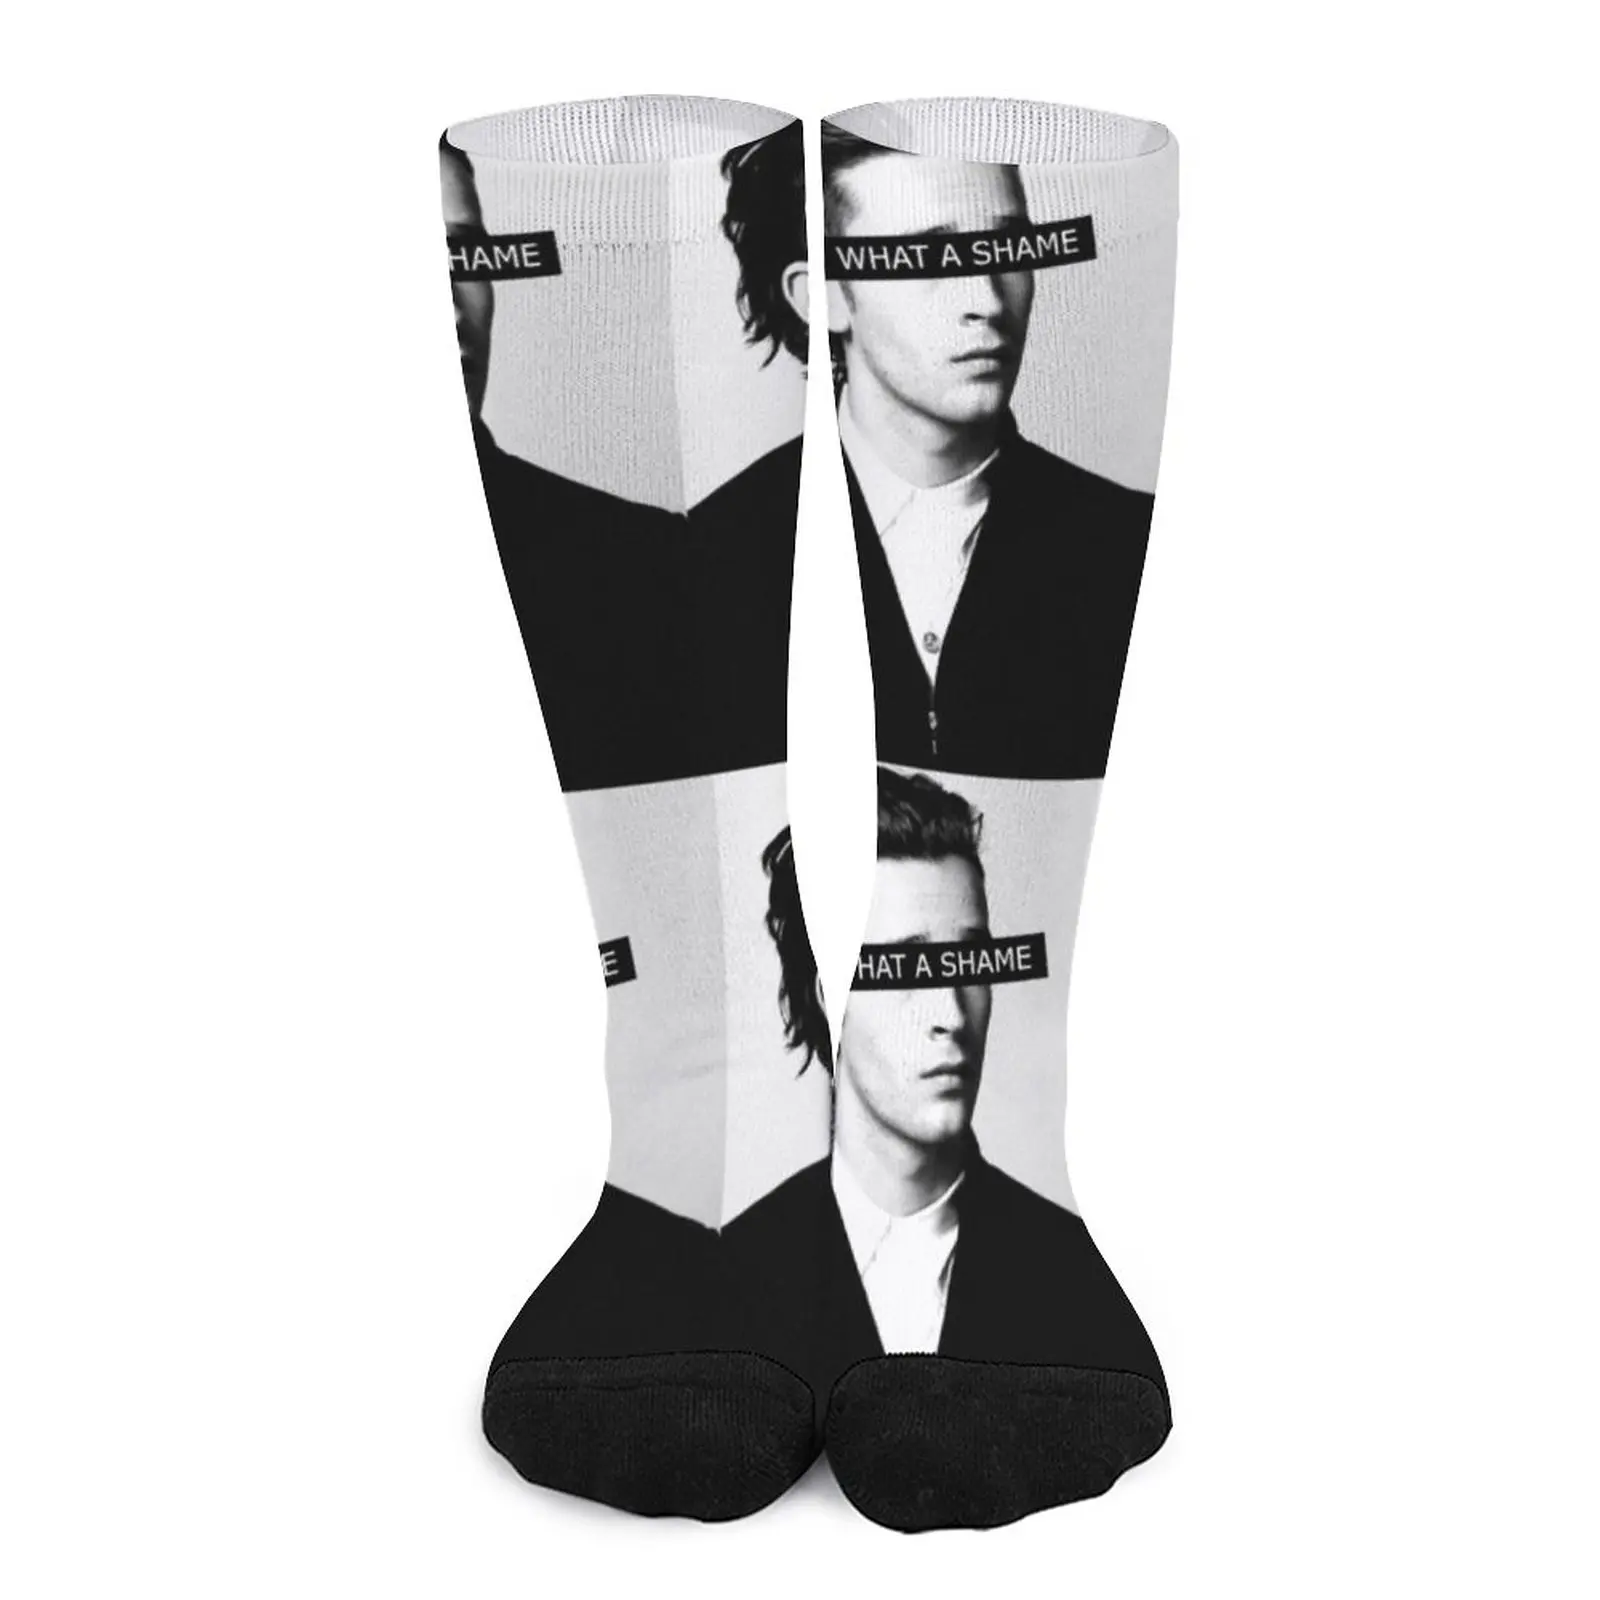 WHAT A SHAME - Matty Healy of The 1975 Socks happy socks Wholesale what belongs to you м greenwell